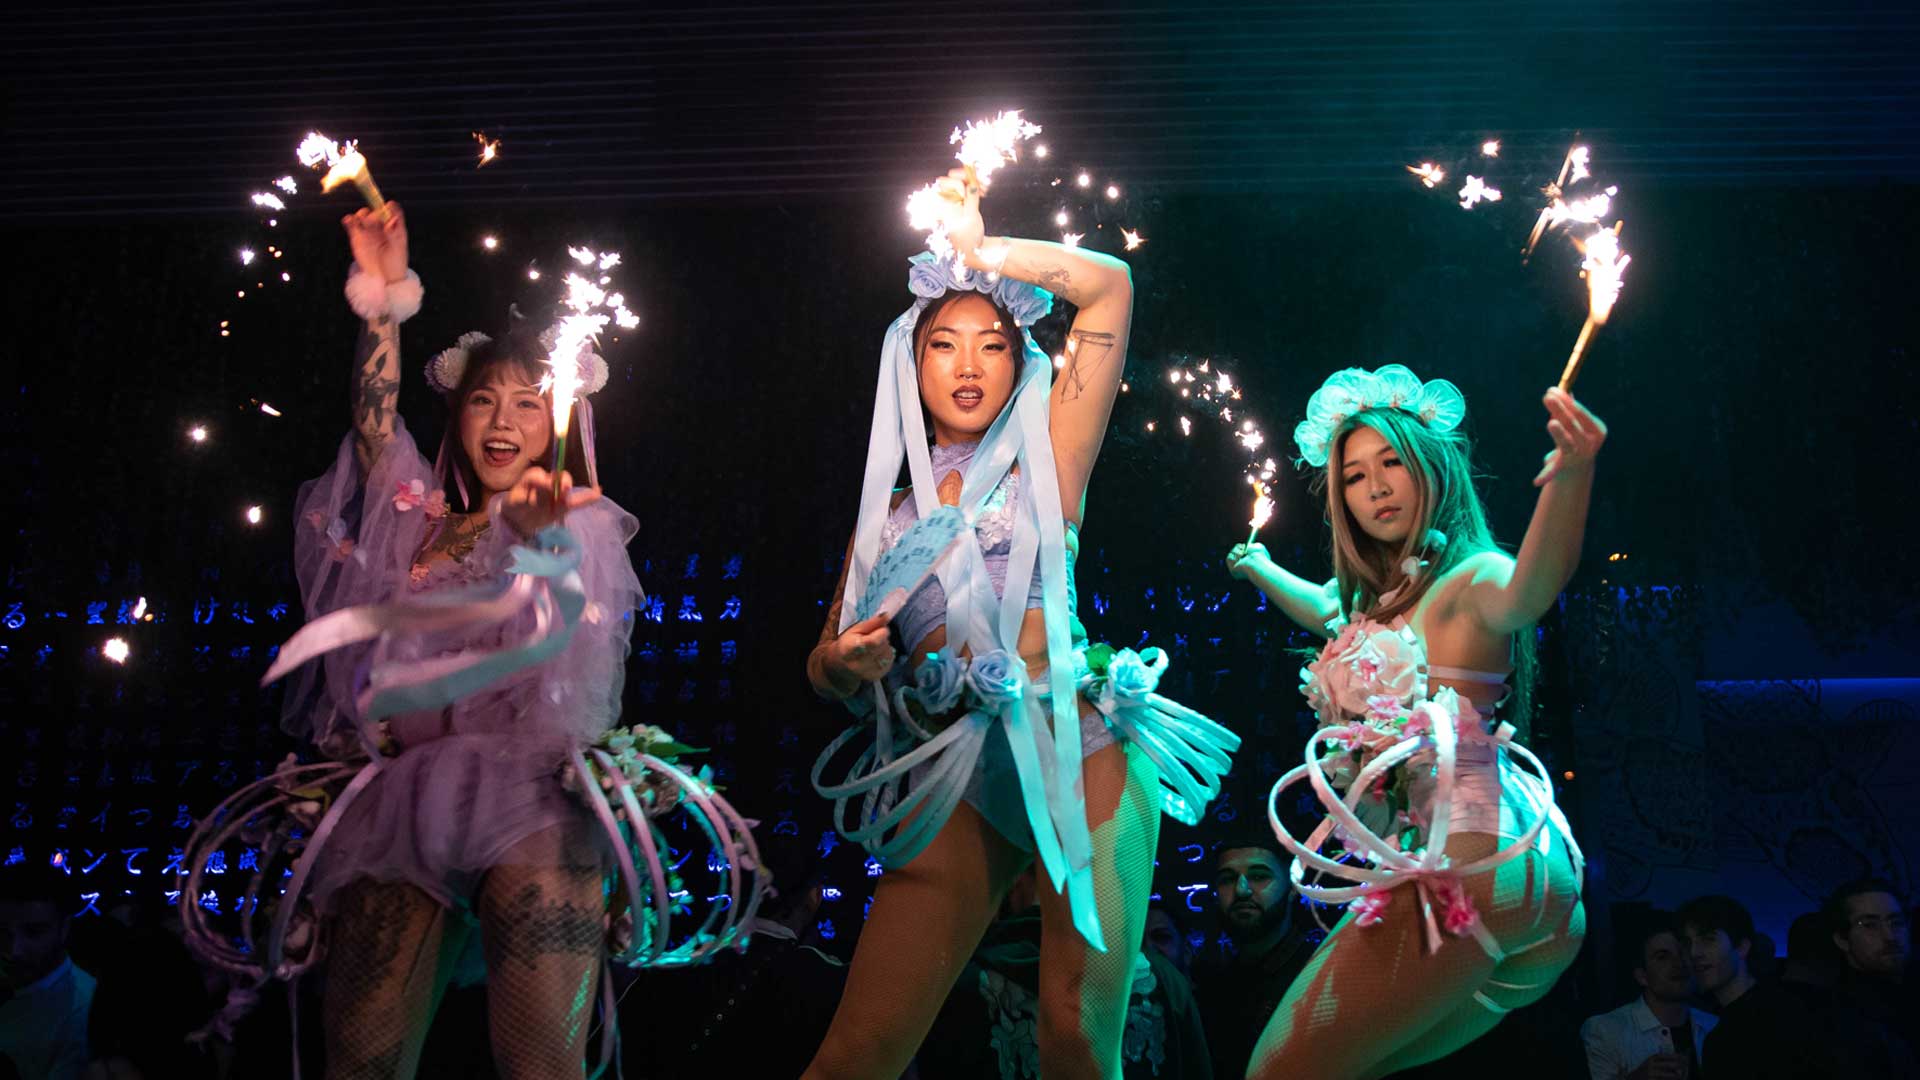 3 female dancers giving a show with fire